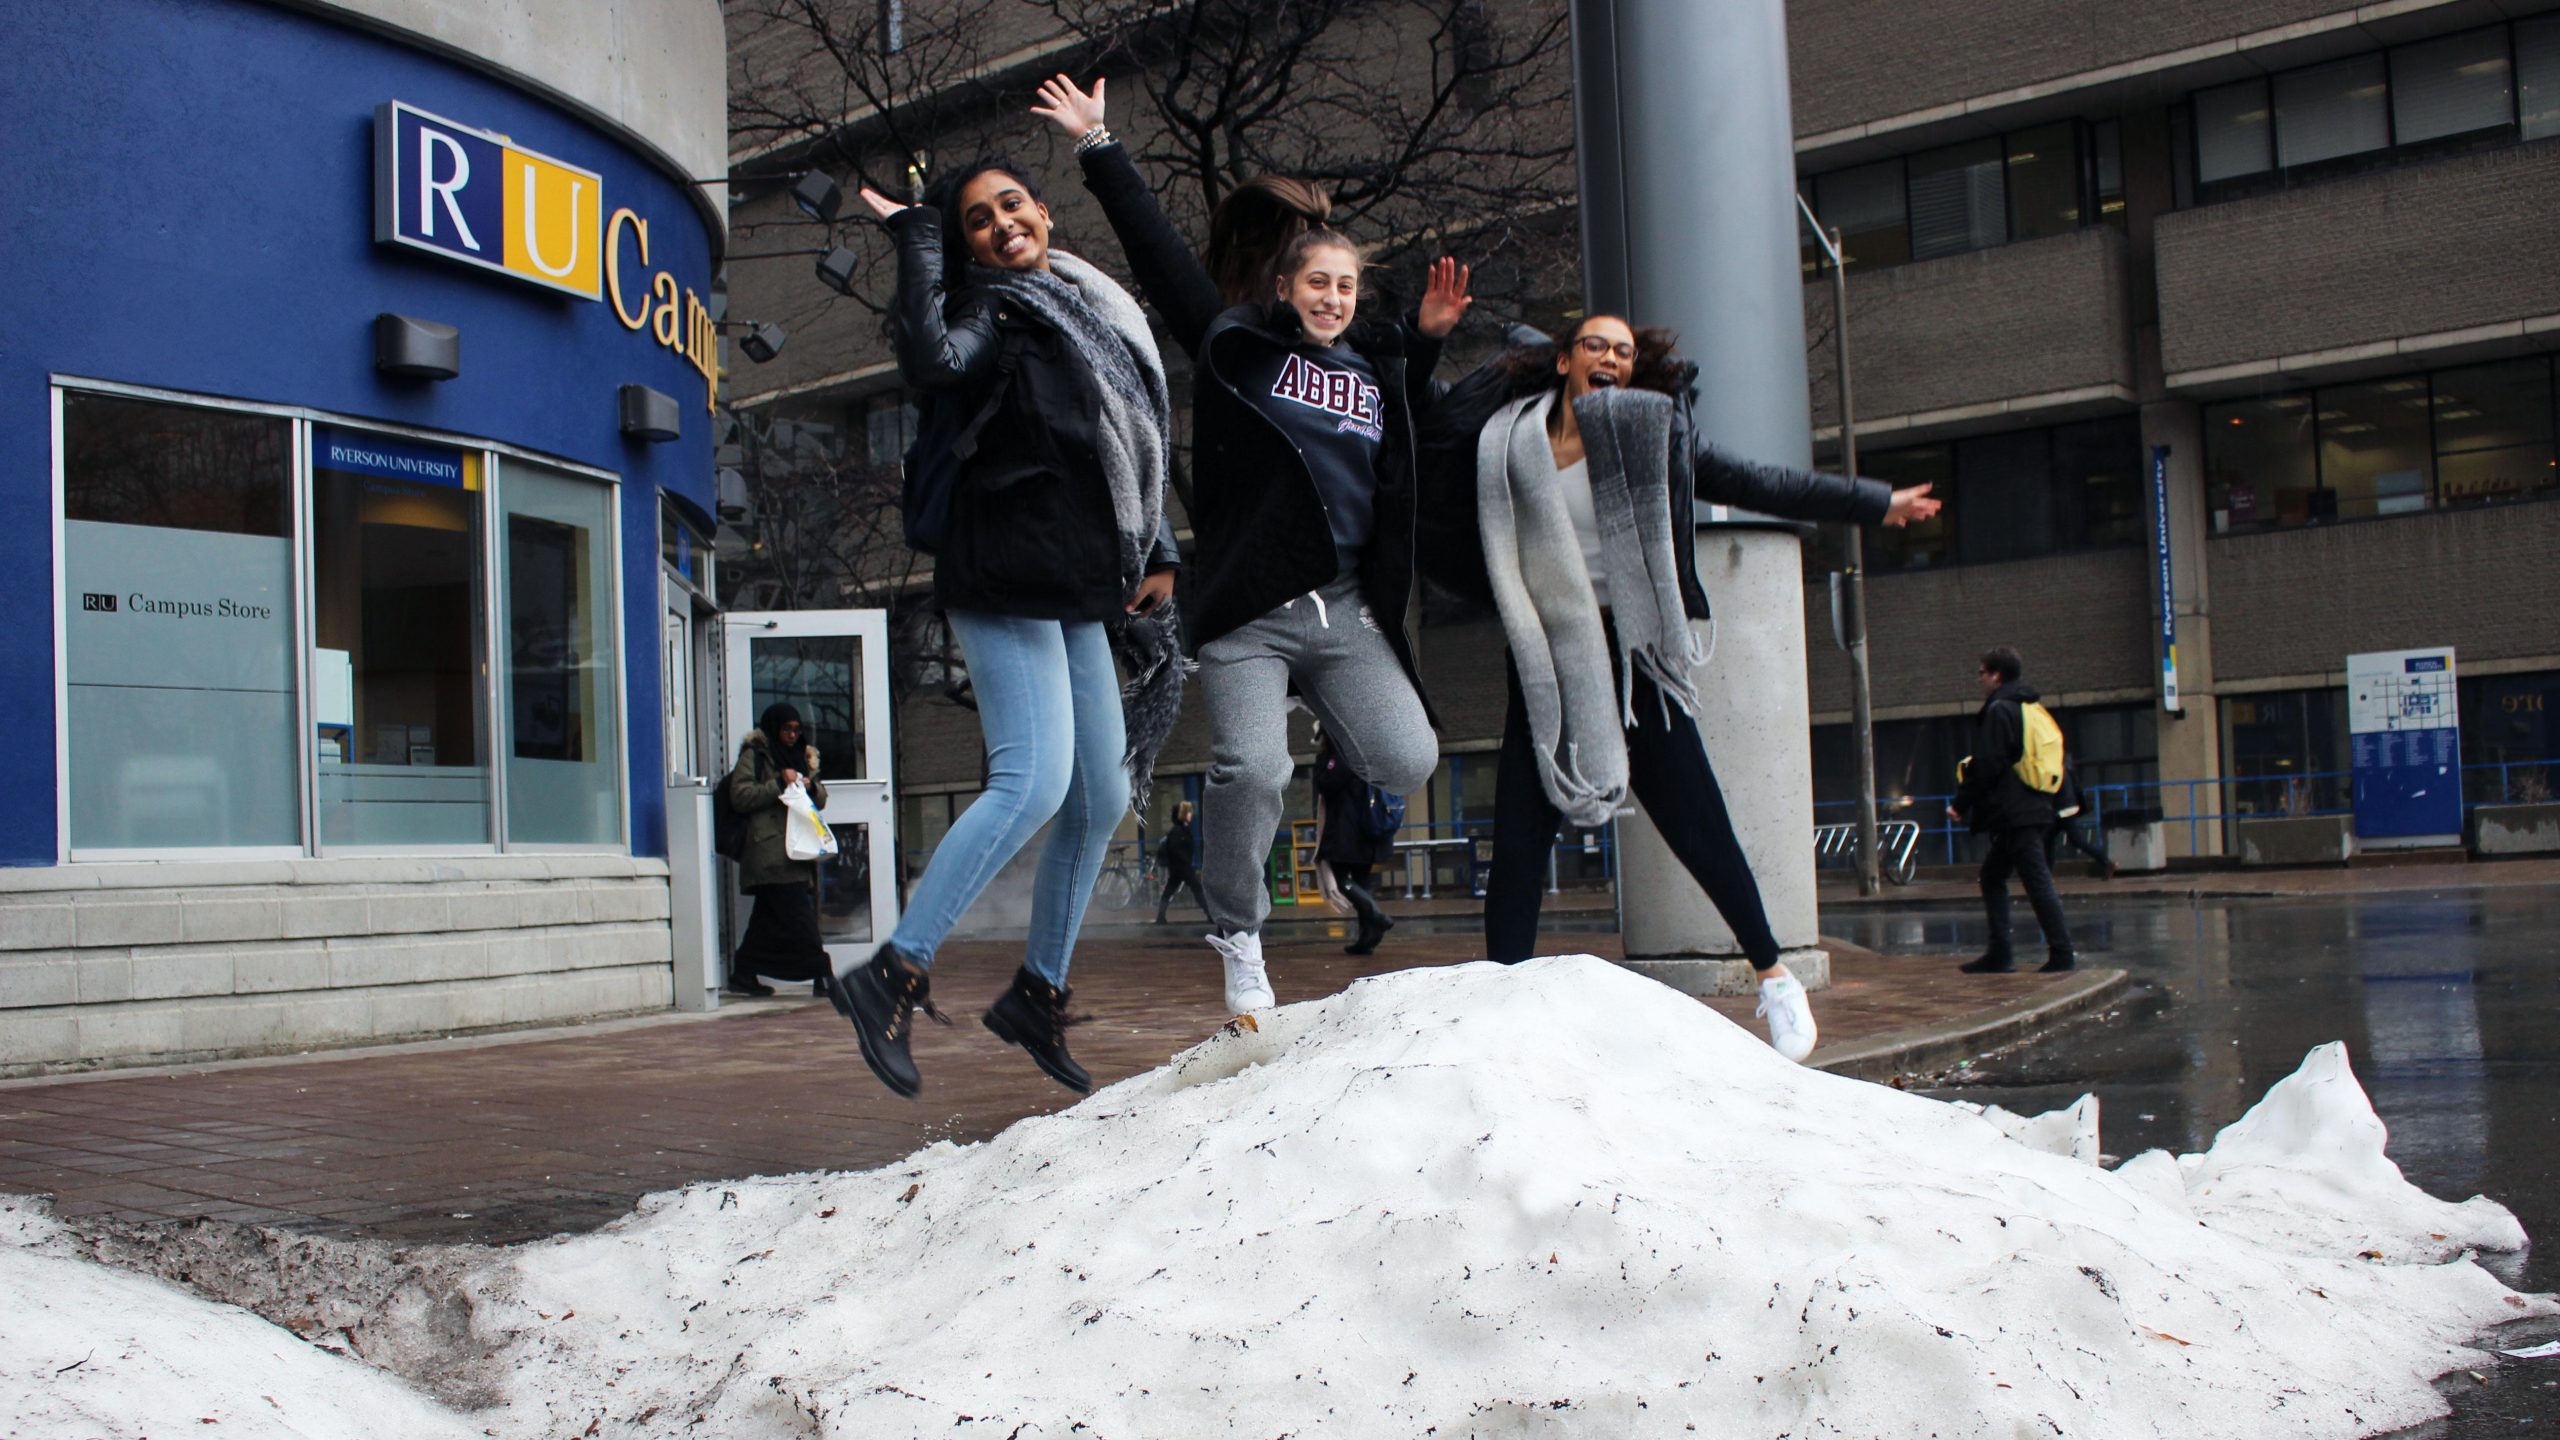 Three girls happily jump in a pile of snow on Gould Street.